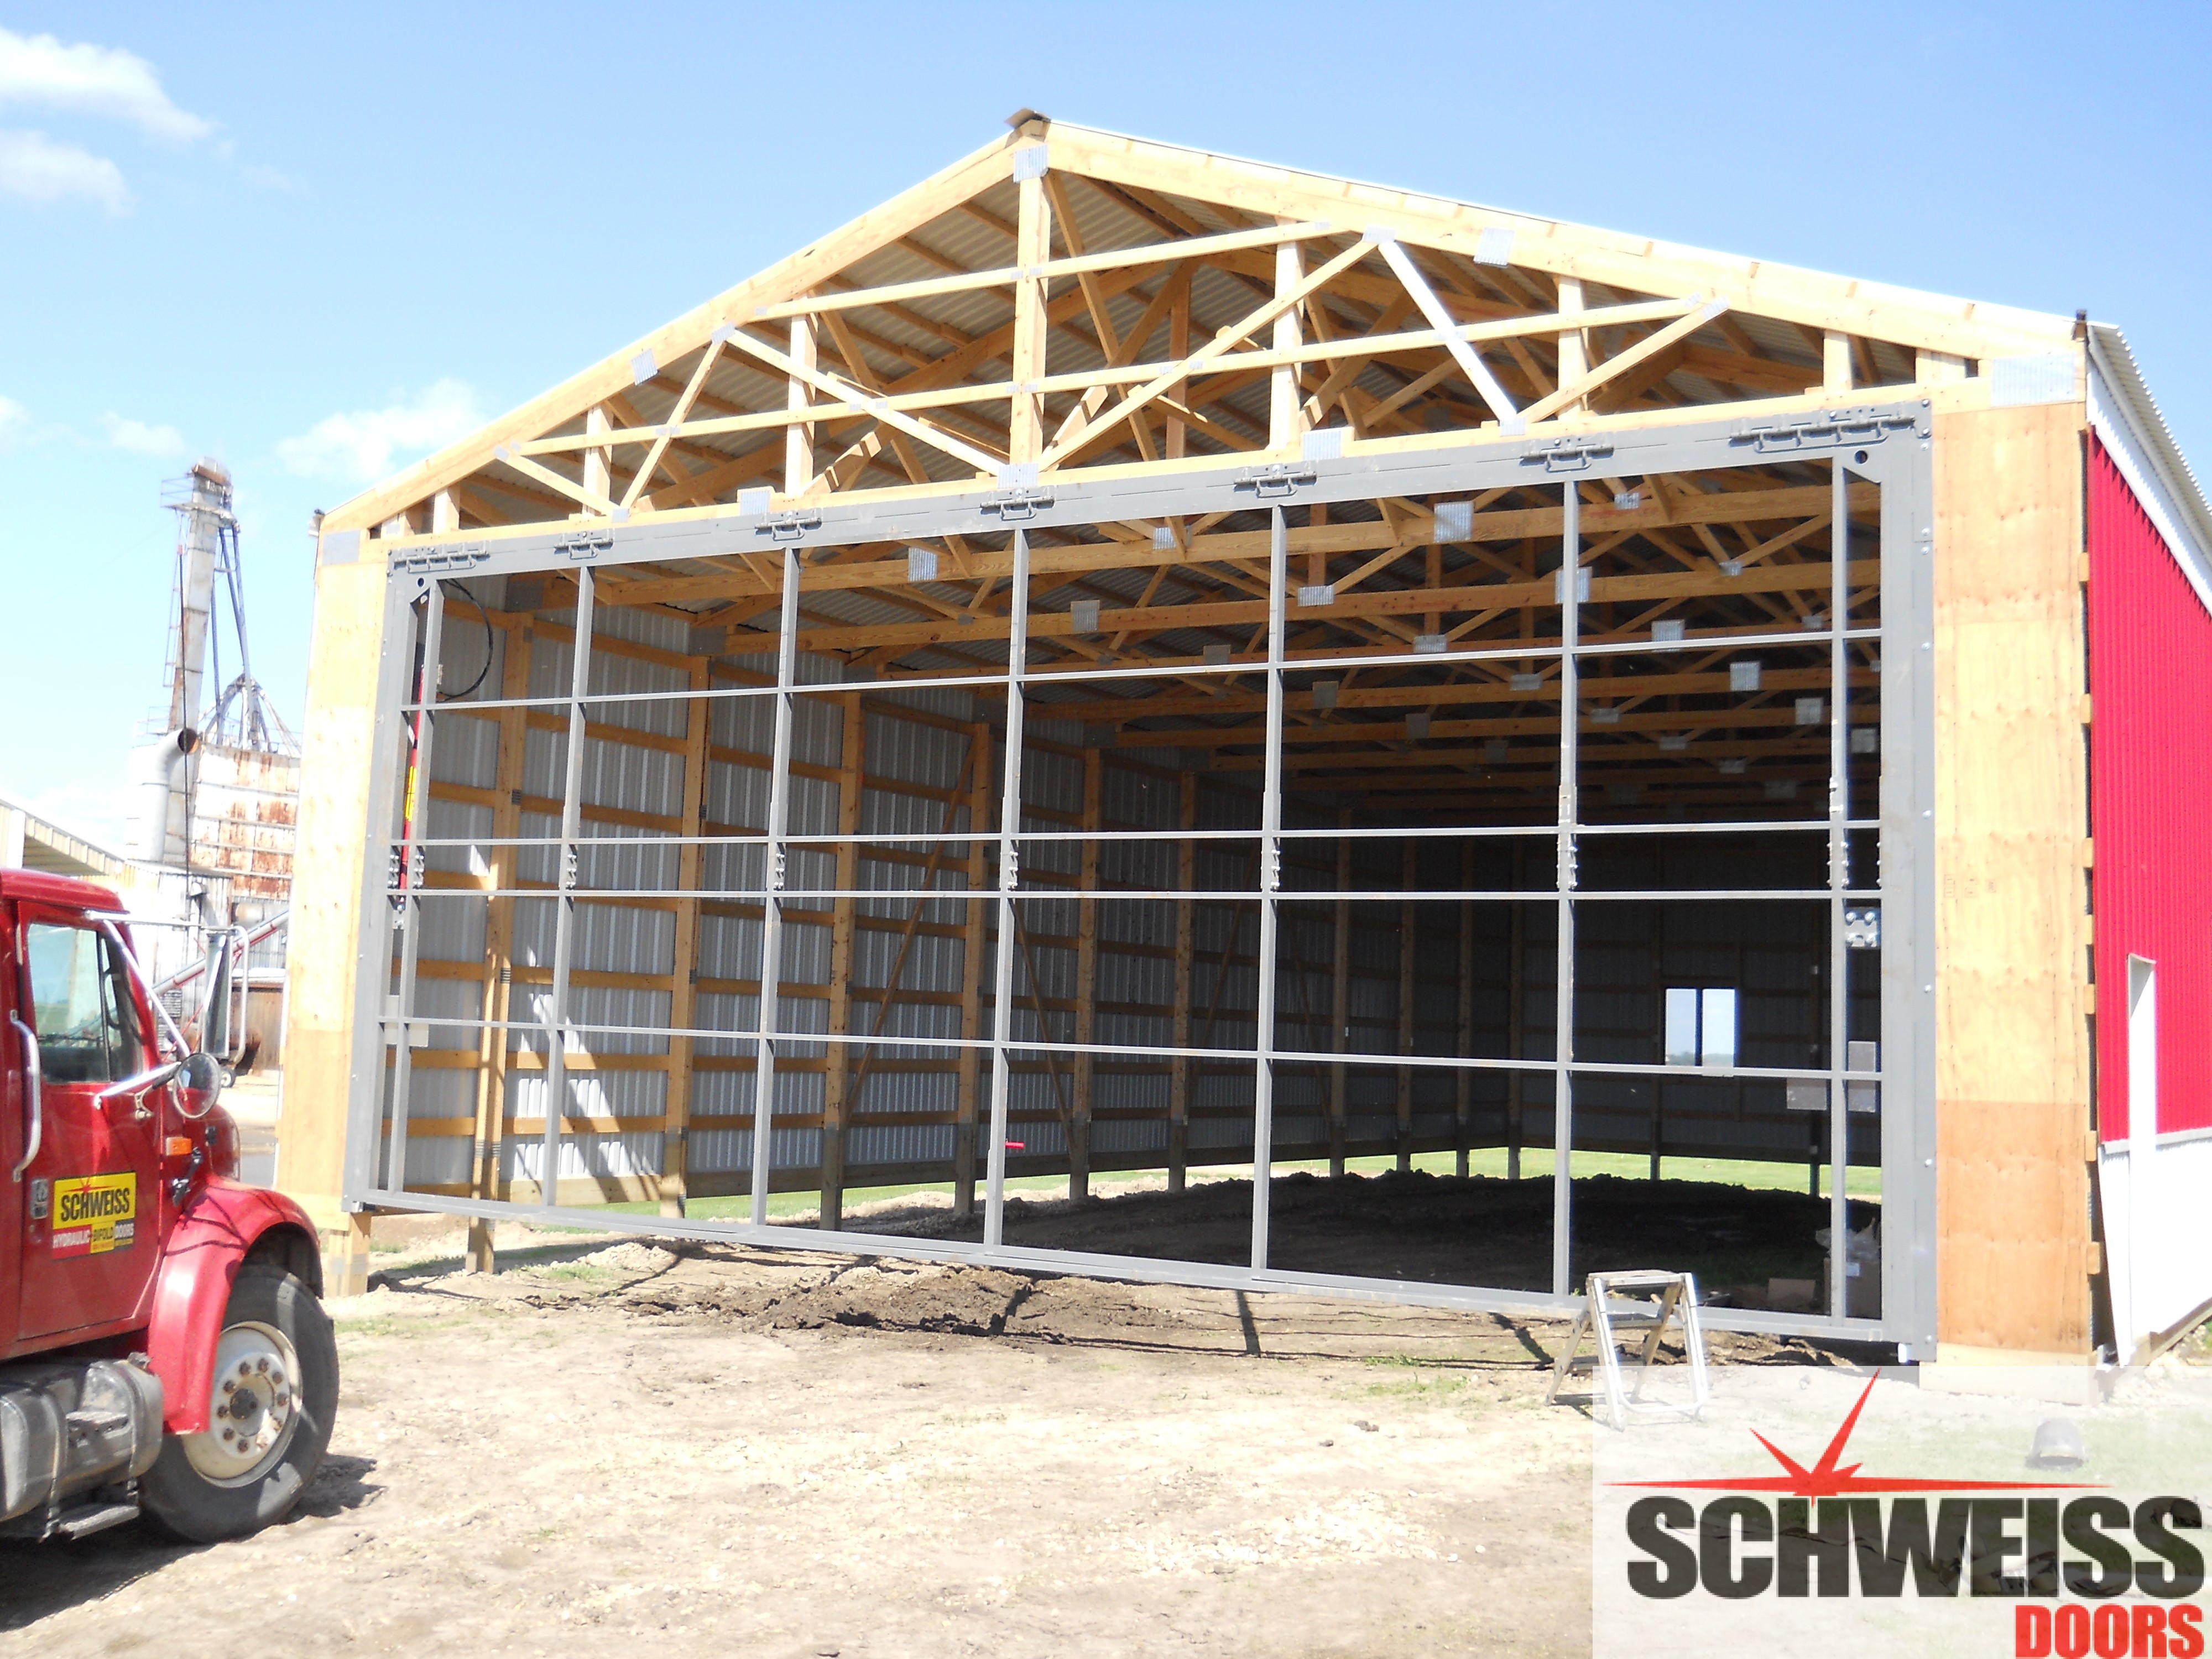 Schweiss Hydraulic doors on pole barns are easy to install